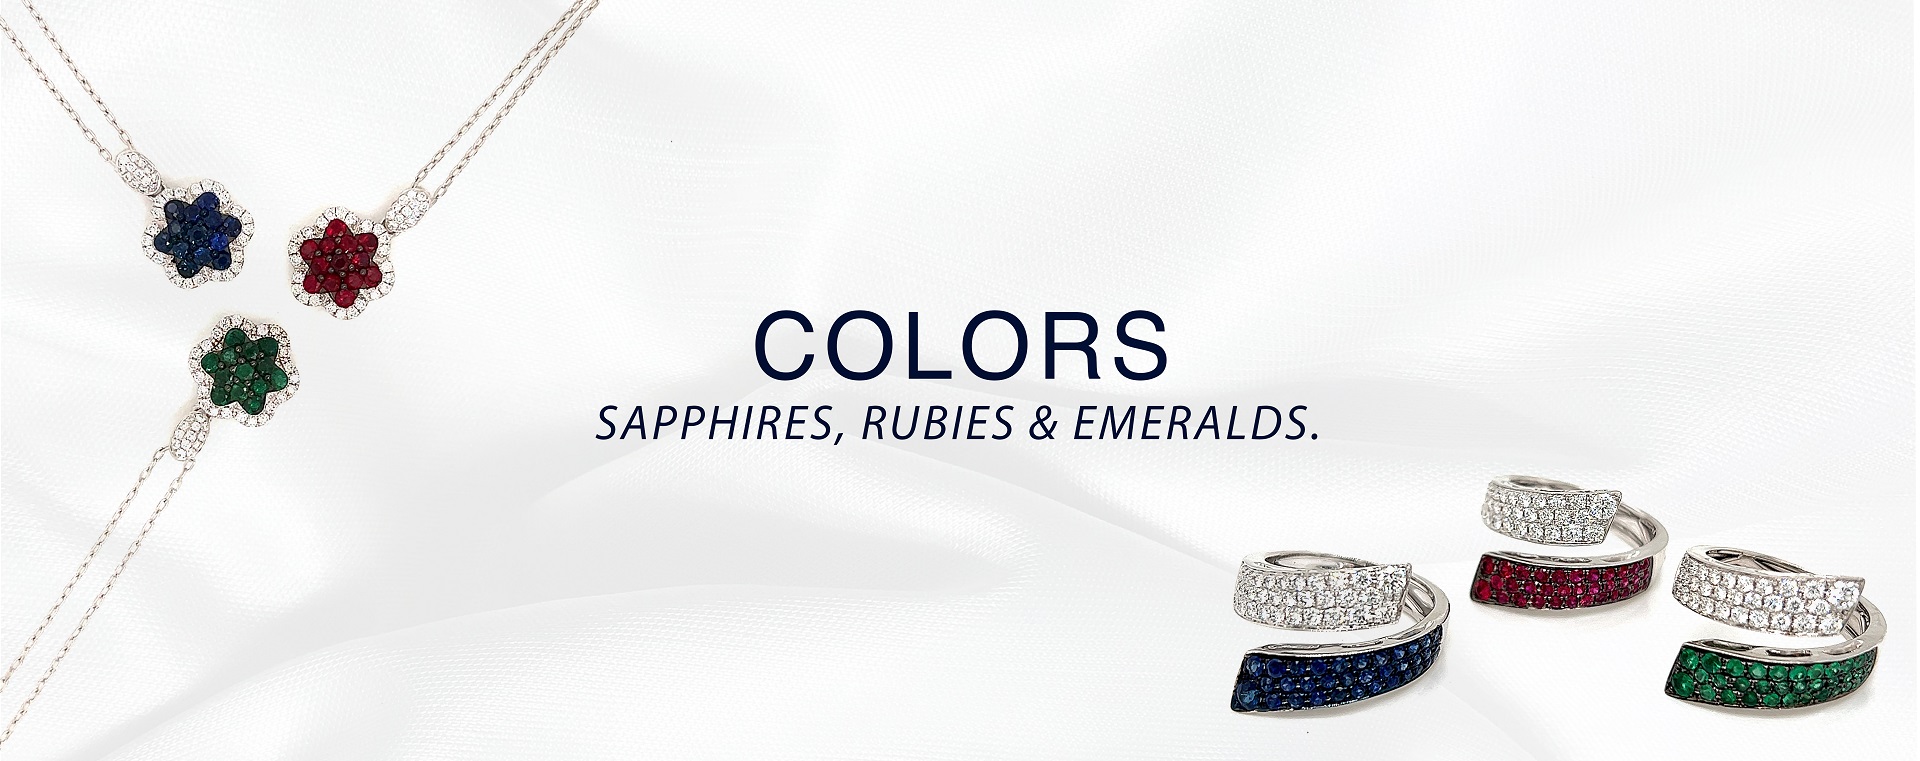 Colors (sapphires, rubies, and emeralds) collection